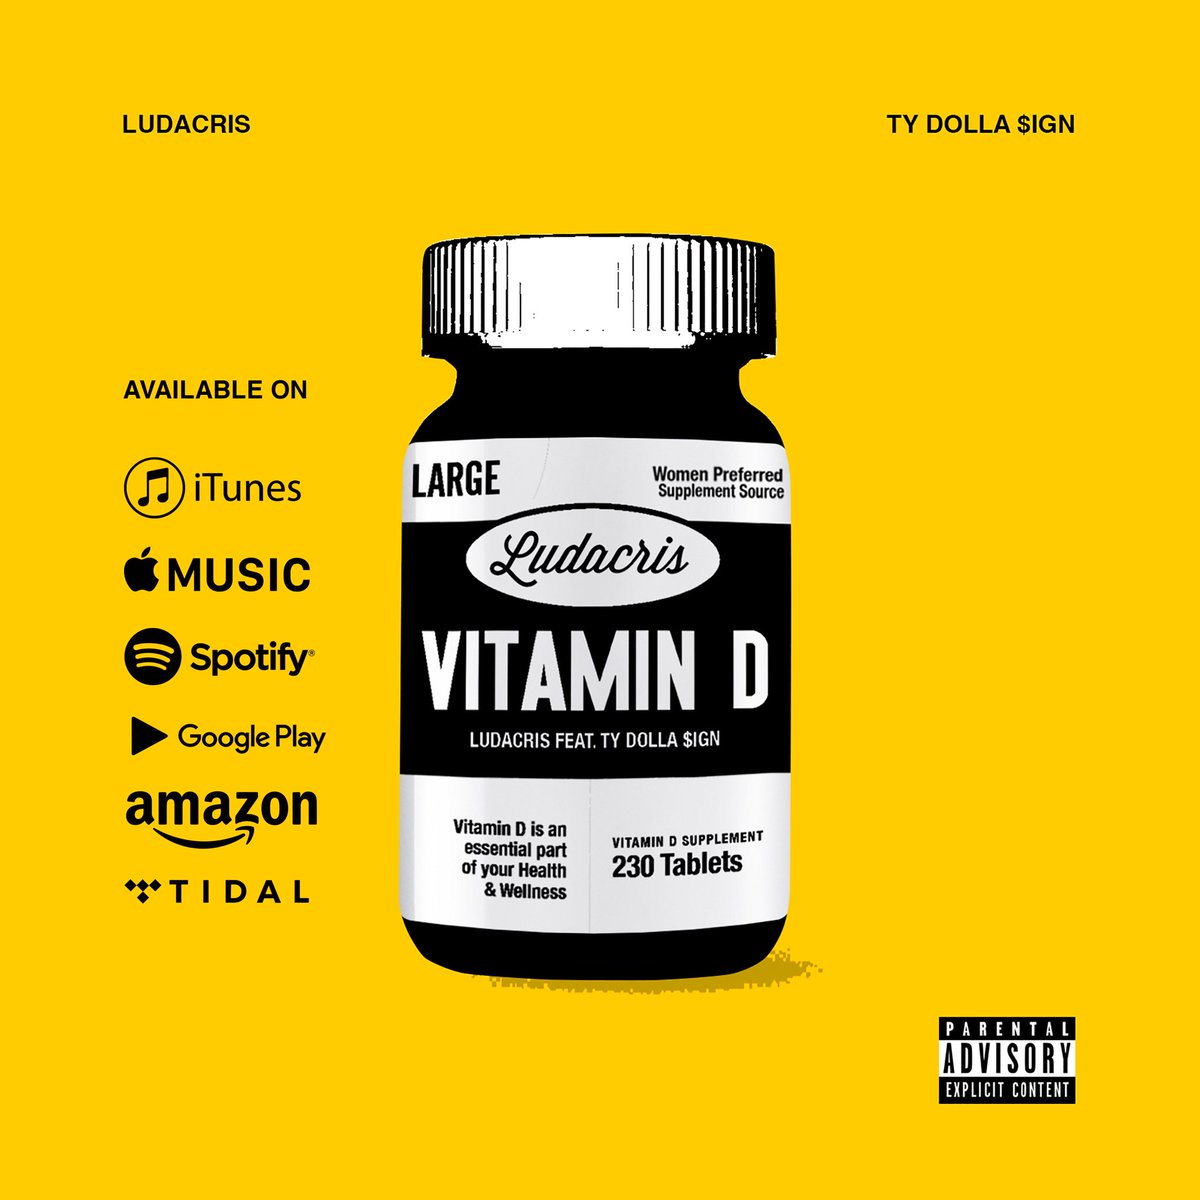 Cinco De Mayo Mood! Get you some #vitamind this Weekend! ???????????????? OUT NOW!!! Summertime Anthem! ???????????????? https://t.co/95bXy3iqr2